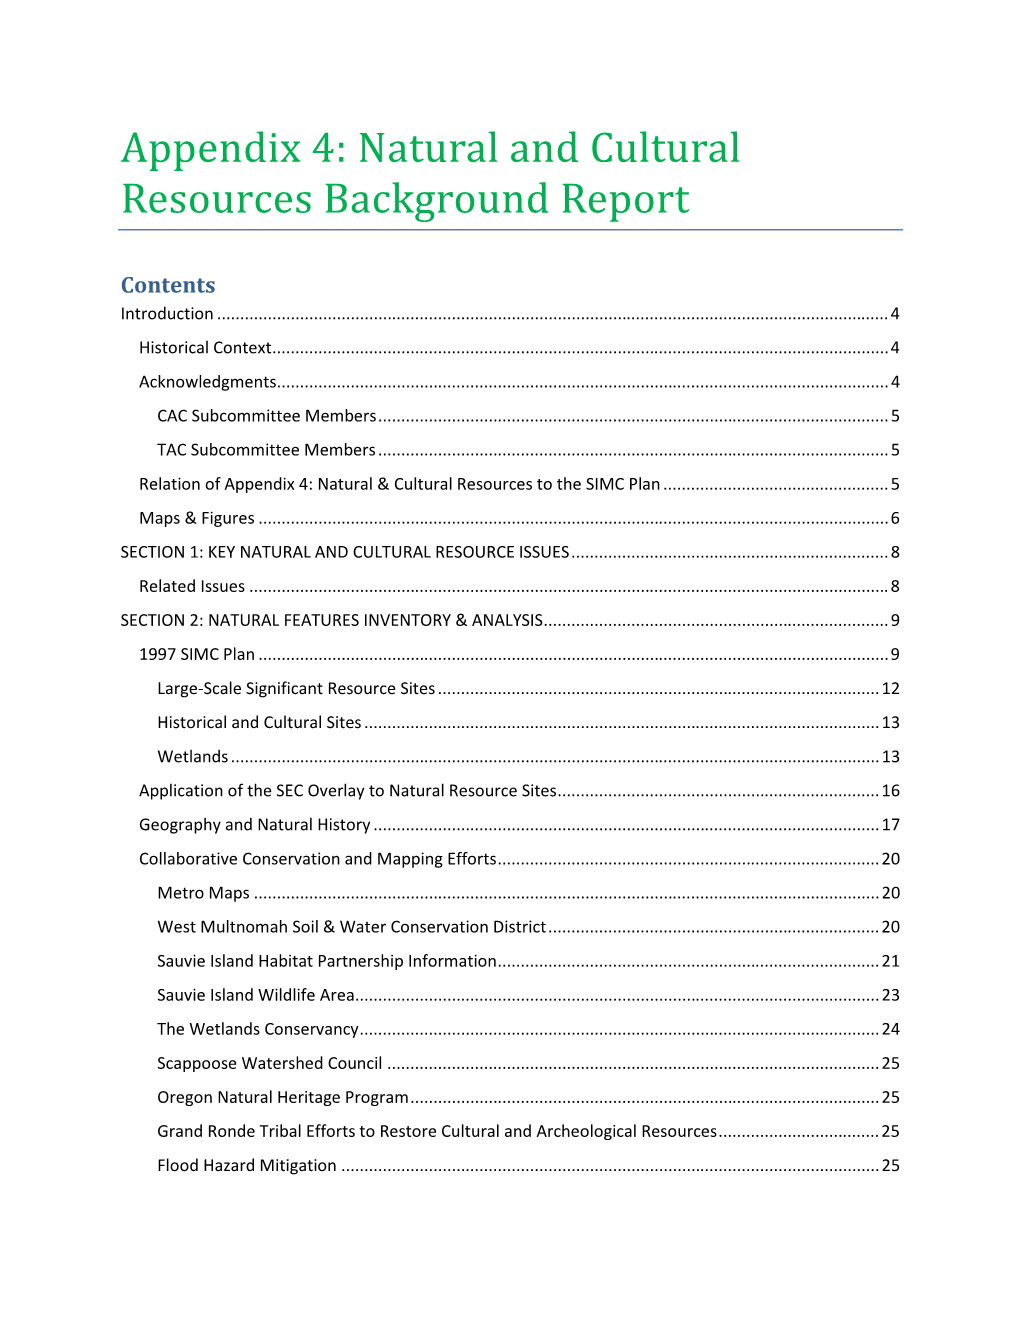 Natural and Cultural Resources Background Report